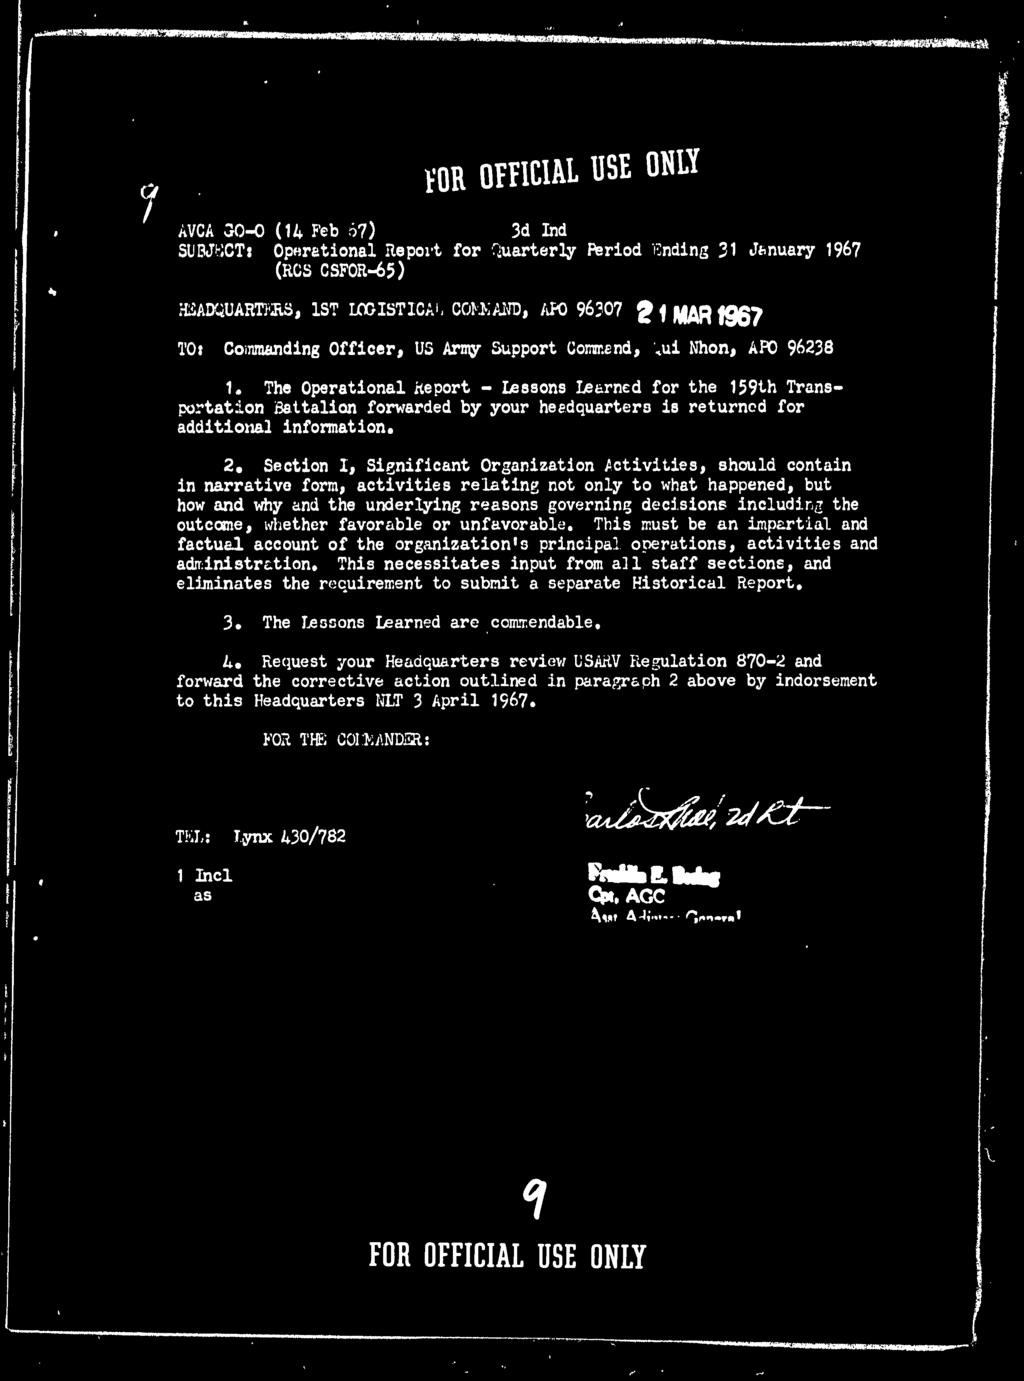 1 VOR OmCIAL USE ONW AVCA 30-0 (14 Feb 67) 3d Ind SllBJWGTi Operational Report for Quarterly Period rinding 31 January 1967 (RCS CSFOR-65) HiiADCiUARTPES, 1ST LOOISTICA!